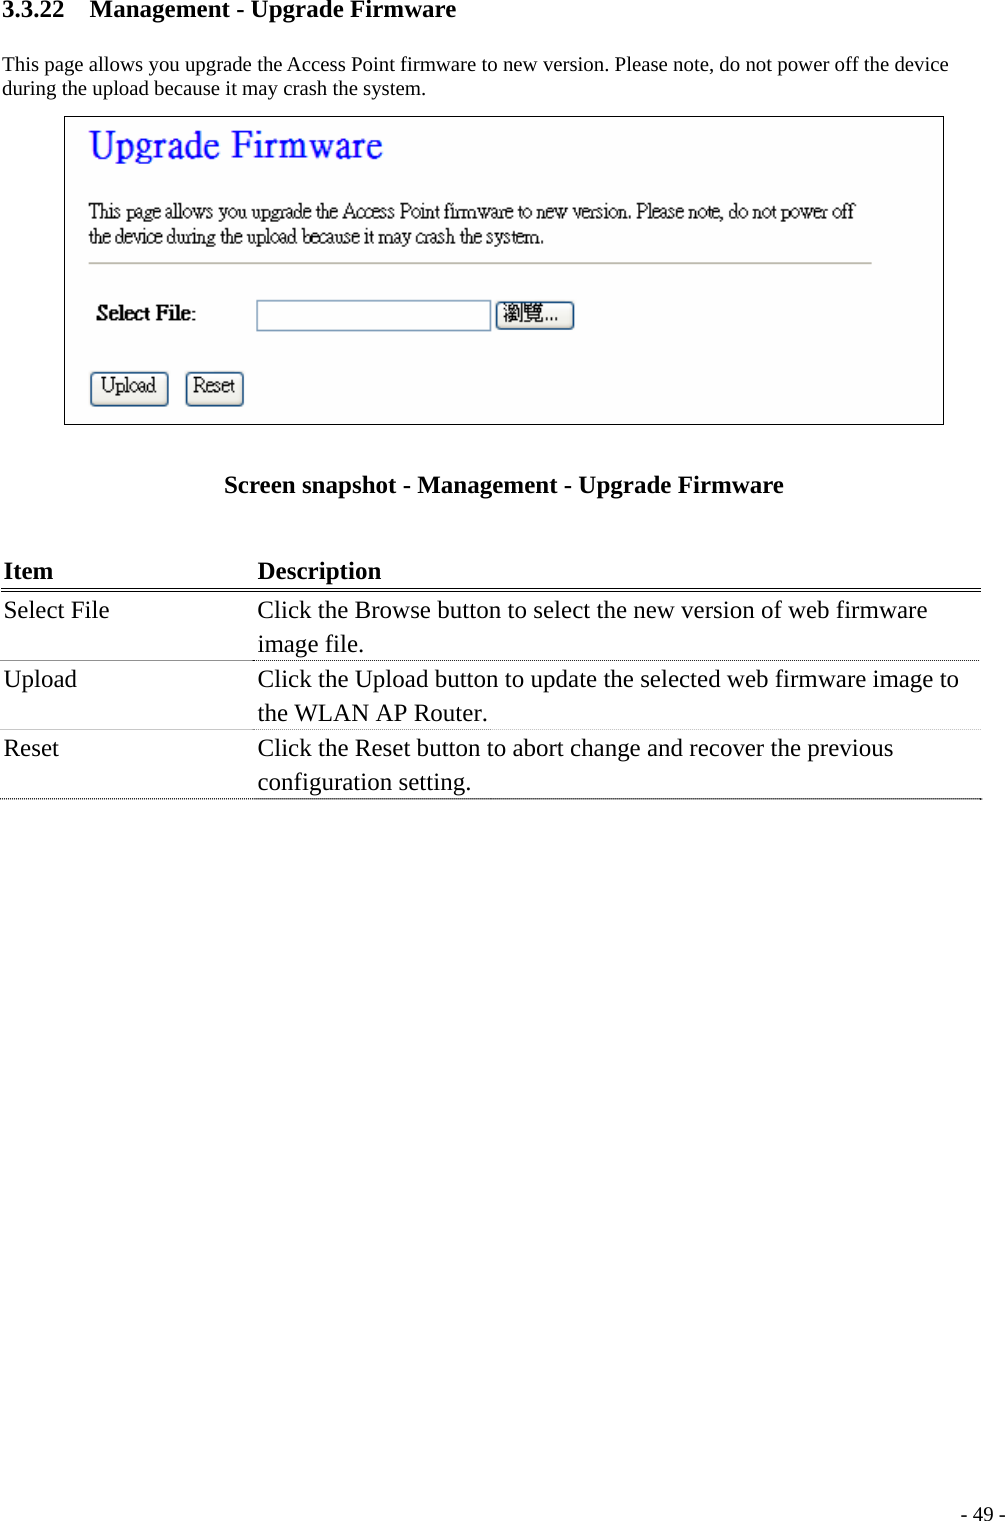 3.3.22  Management - Upgrade Firmware This page allows you upgrade the Access Point firmware to new version. Please note, do not power off the device during the upload because it may crash the system.  Screen snapshot - Management - Upgrade Firmware  Item Description Select File  Click the Browse button to select the new version of web firmware image file. Upload  Click the Upload button to update the selected web firmware image to the WLAN AP Router. Reset  Click the Reset button to abort change and recover the previous configuration setting.   - 49 -